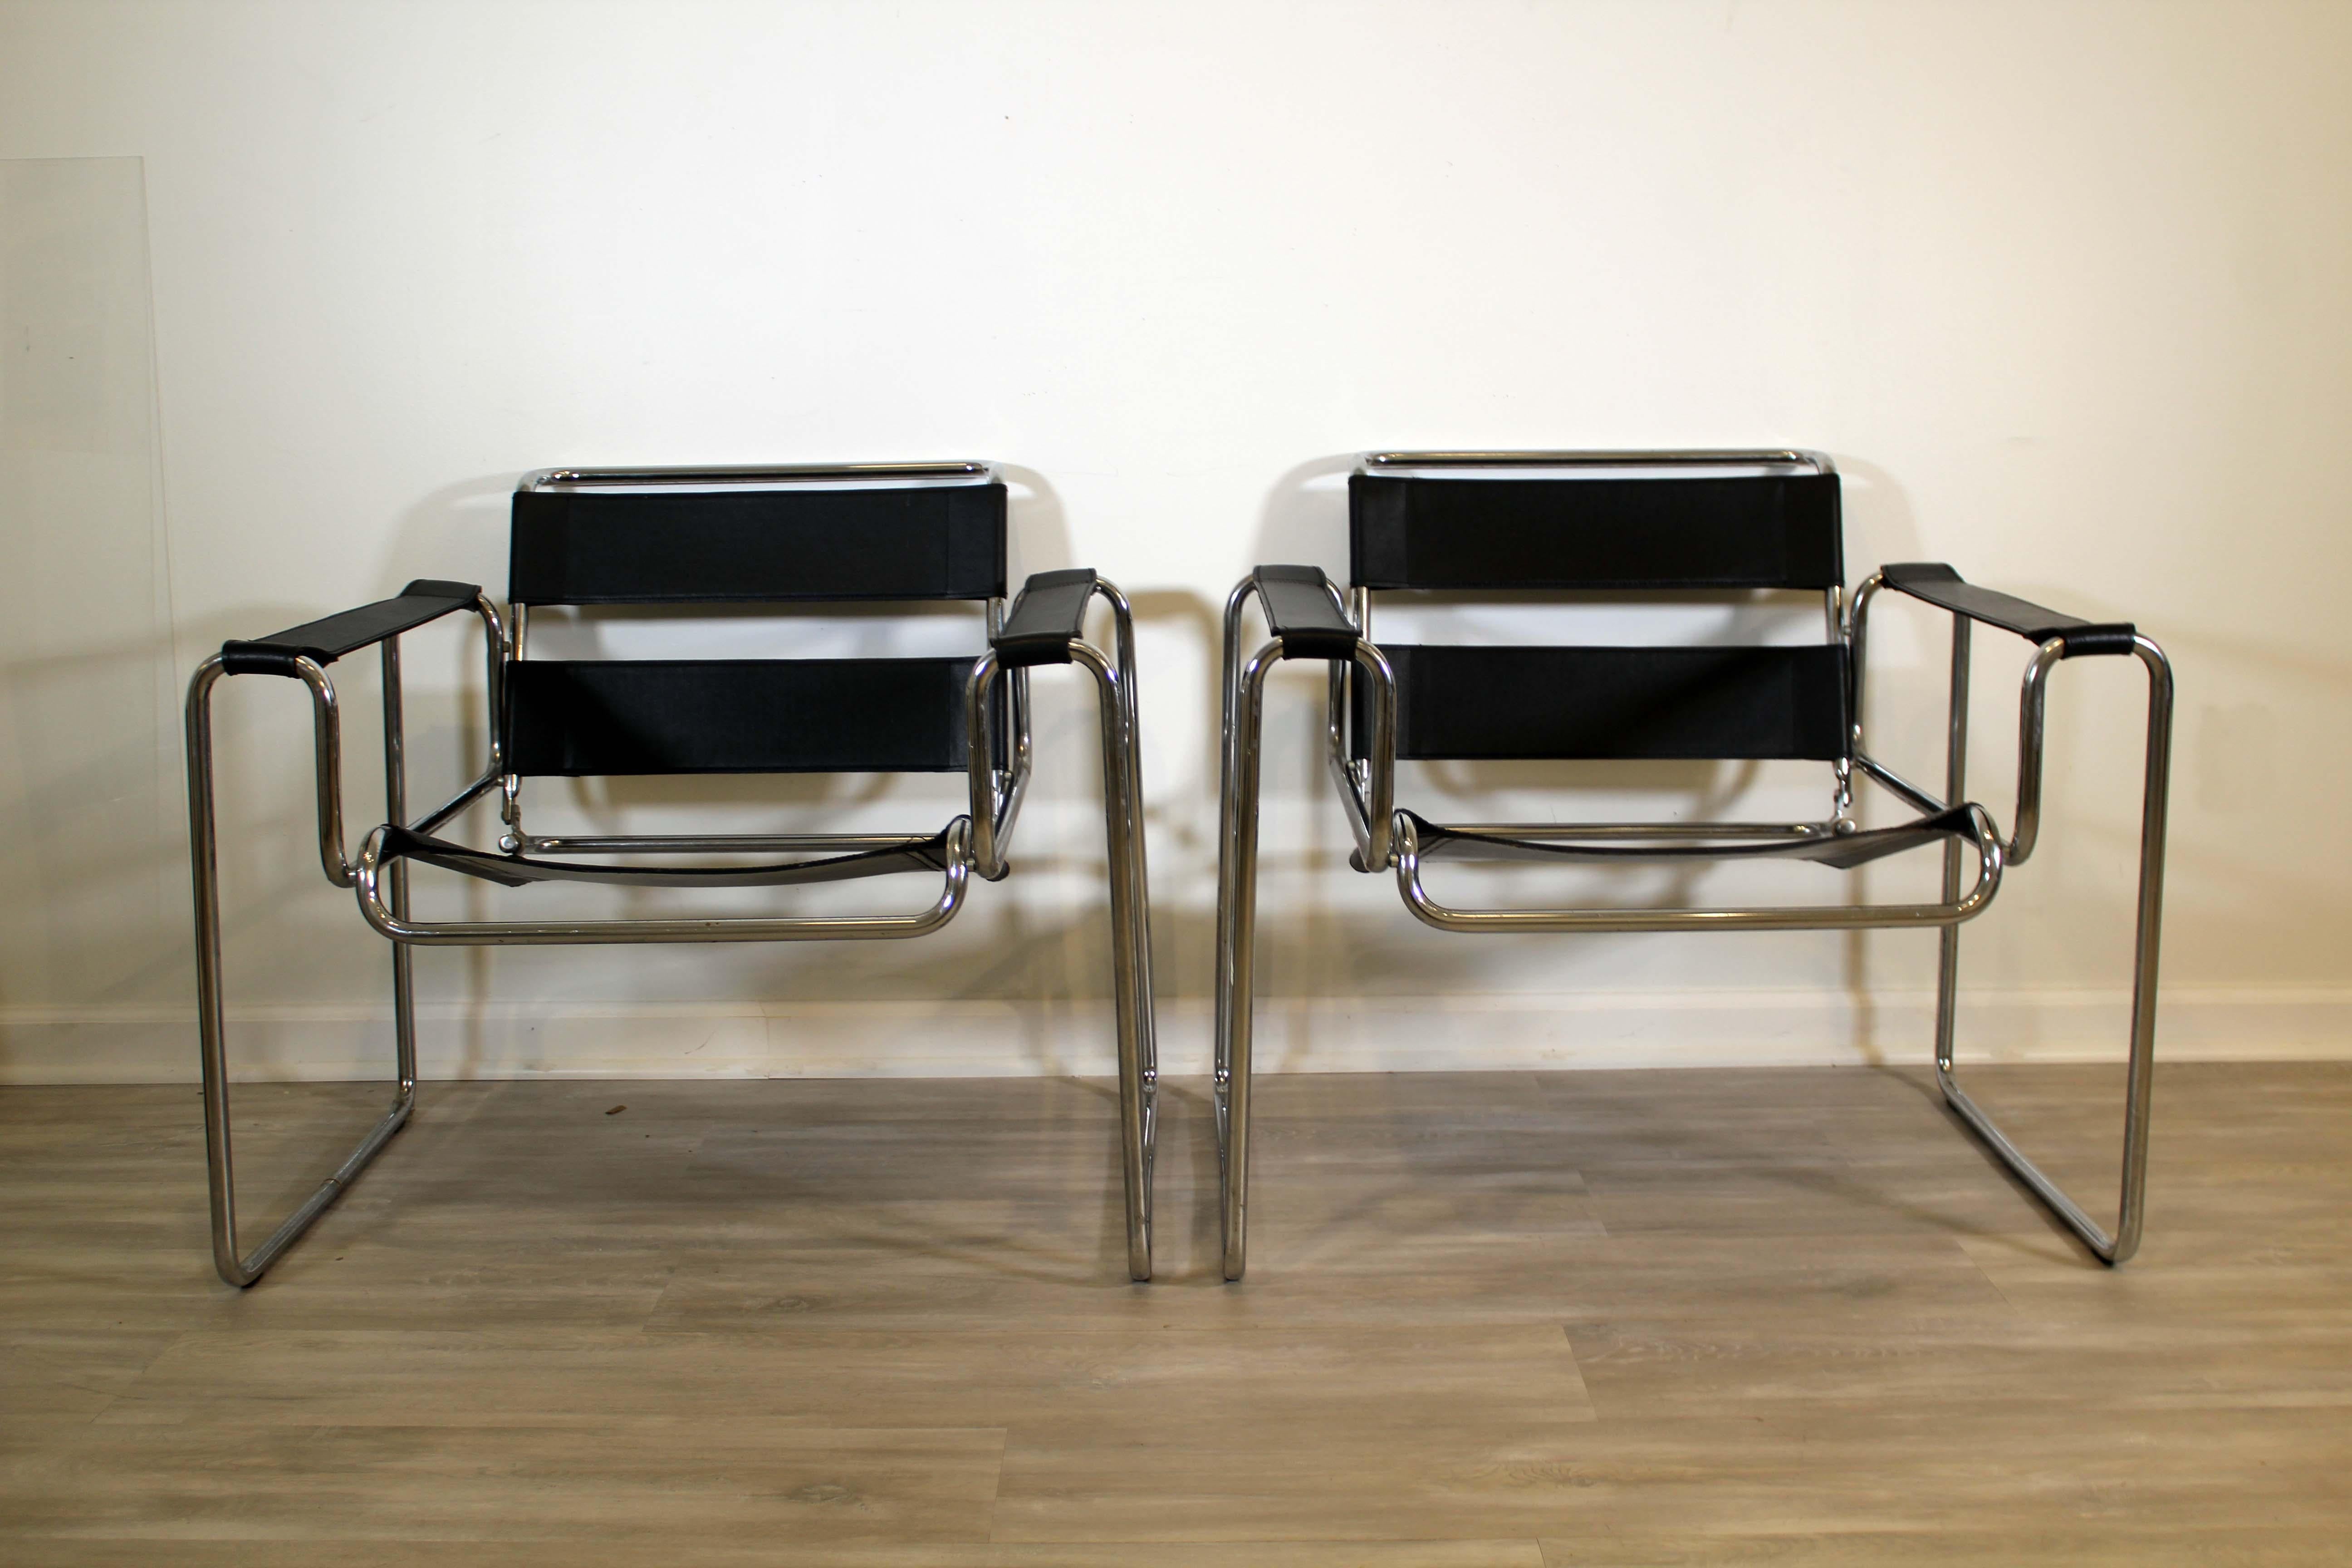 These pair of Black Wassily style chairs are up for consideration. The pair gives the same look and feel of the original constructivist De Stjil art movement pieces. The chrome and black give it the sleek and professional feel that would look